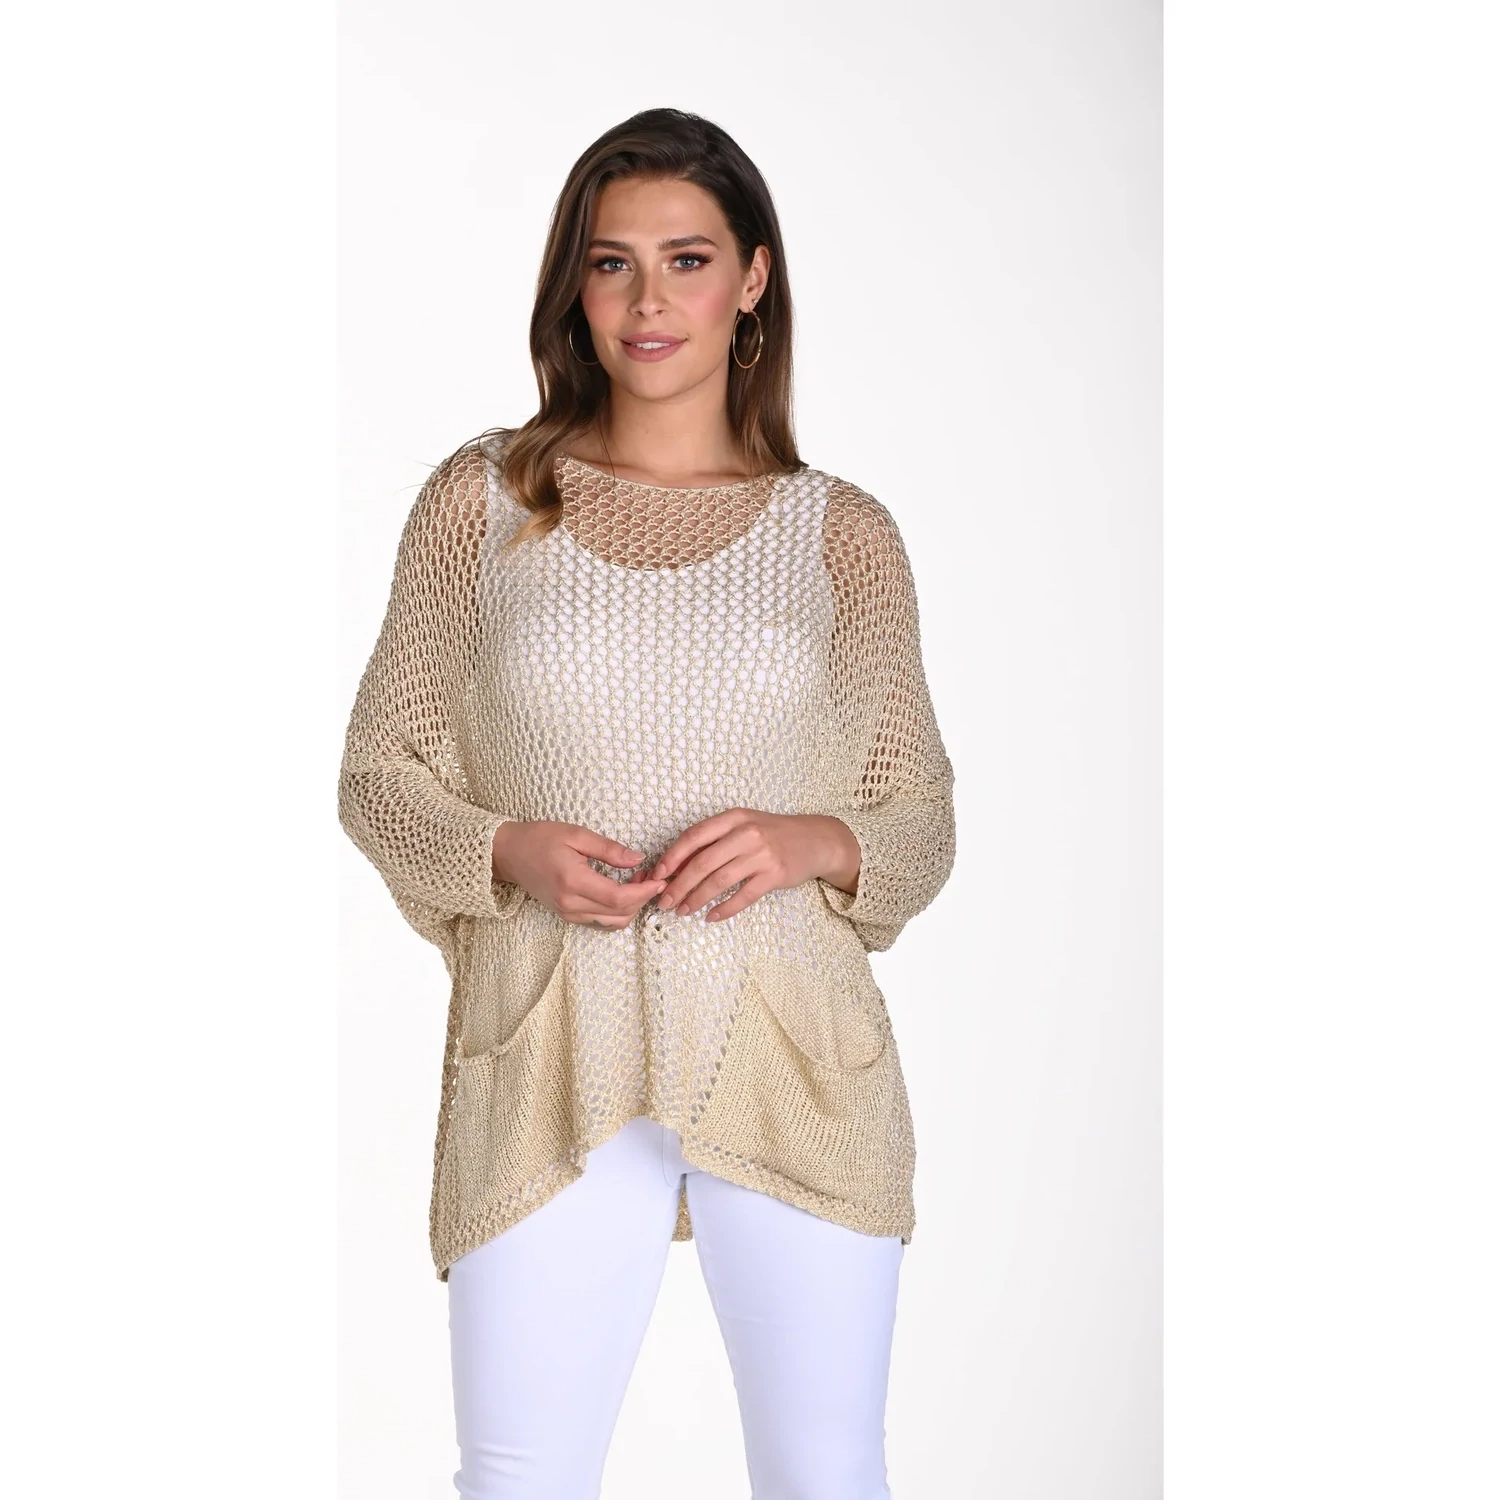 FRANK LYMAN NETTED PULLOVER - SAND/GOLD